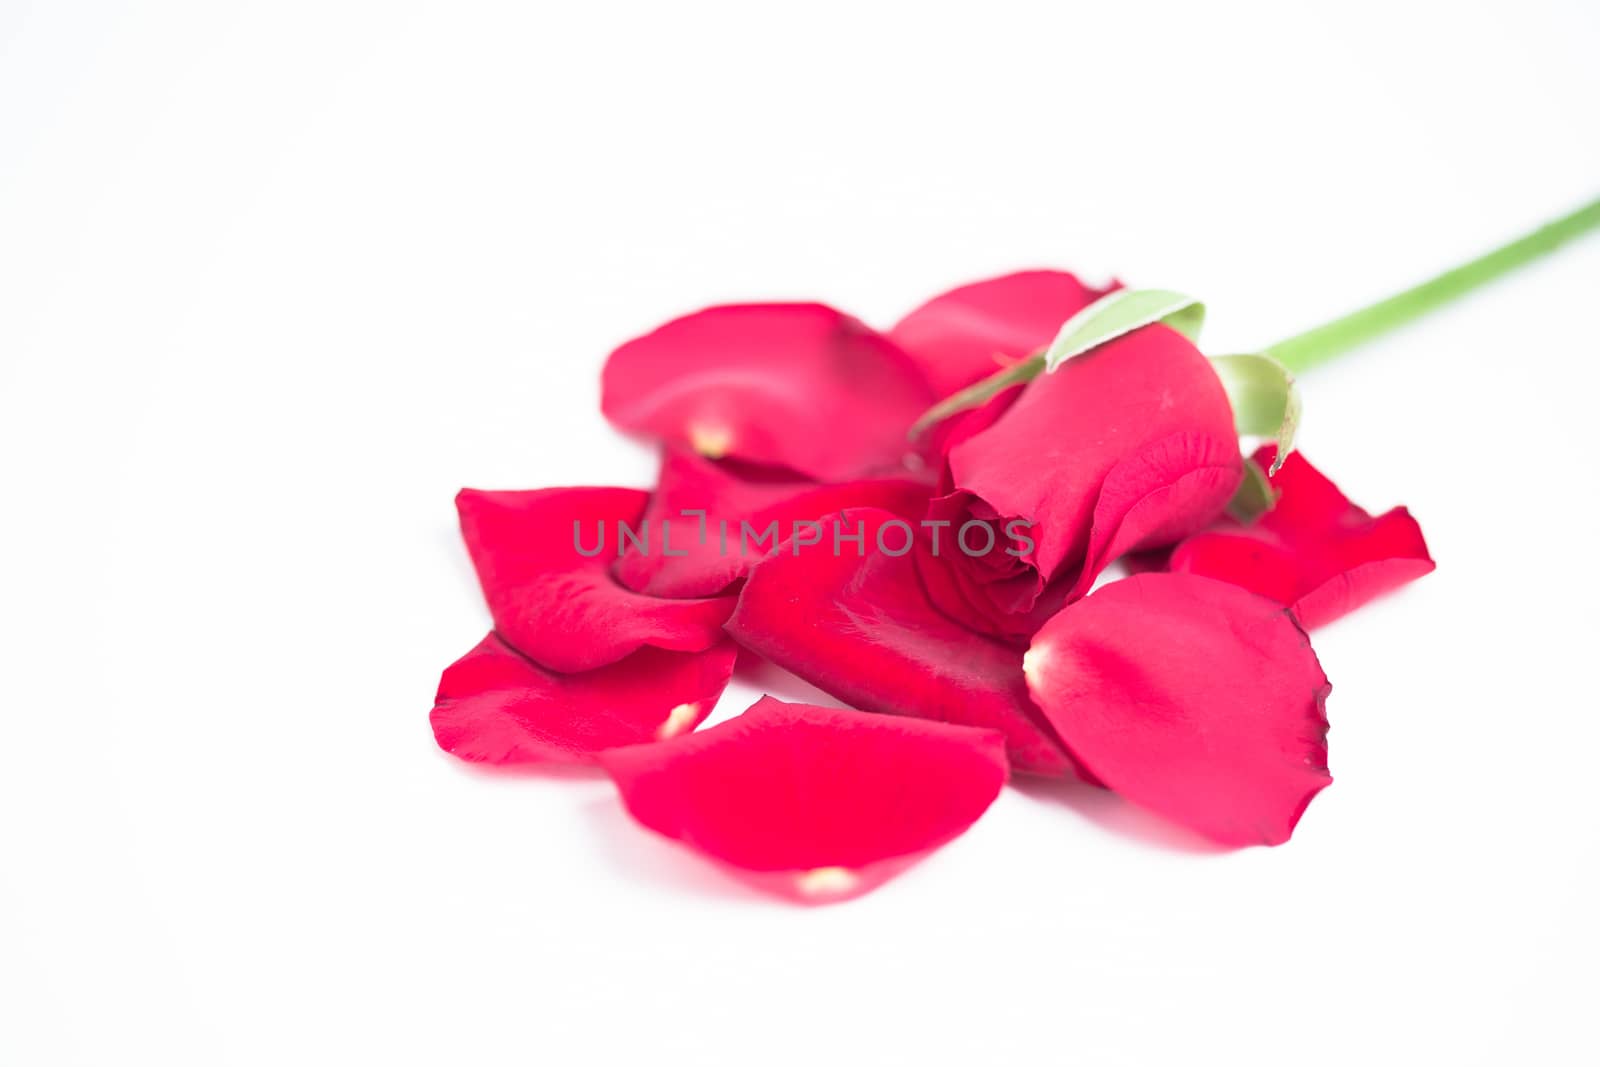 Pink rose and petals on white background